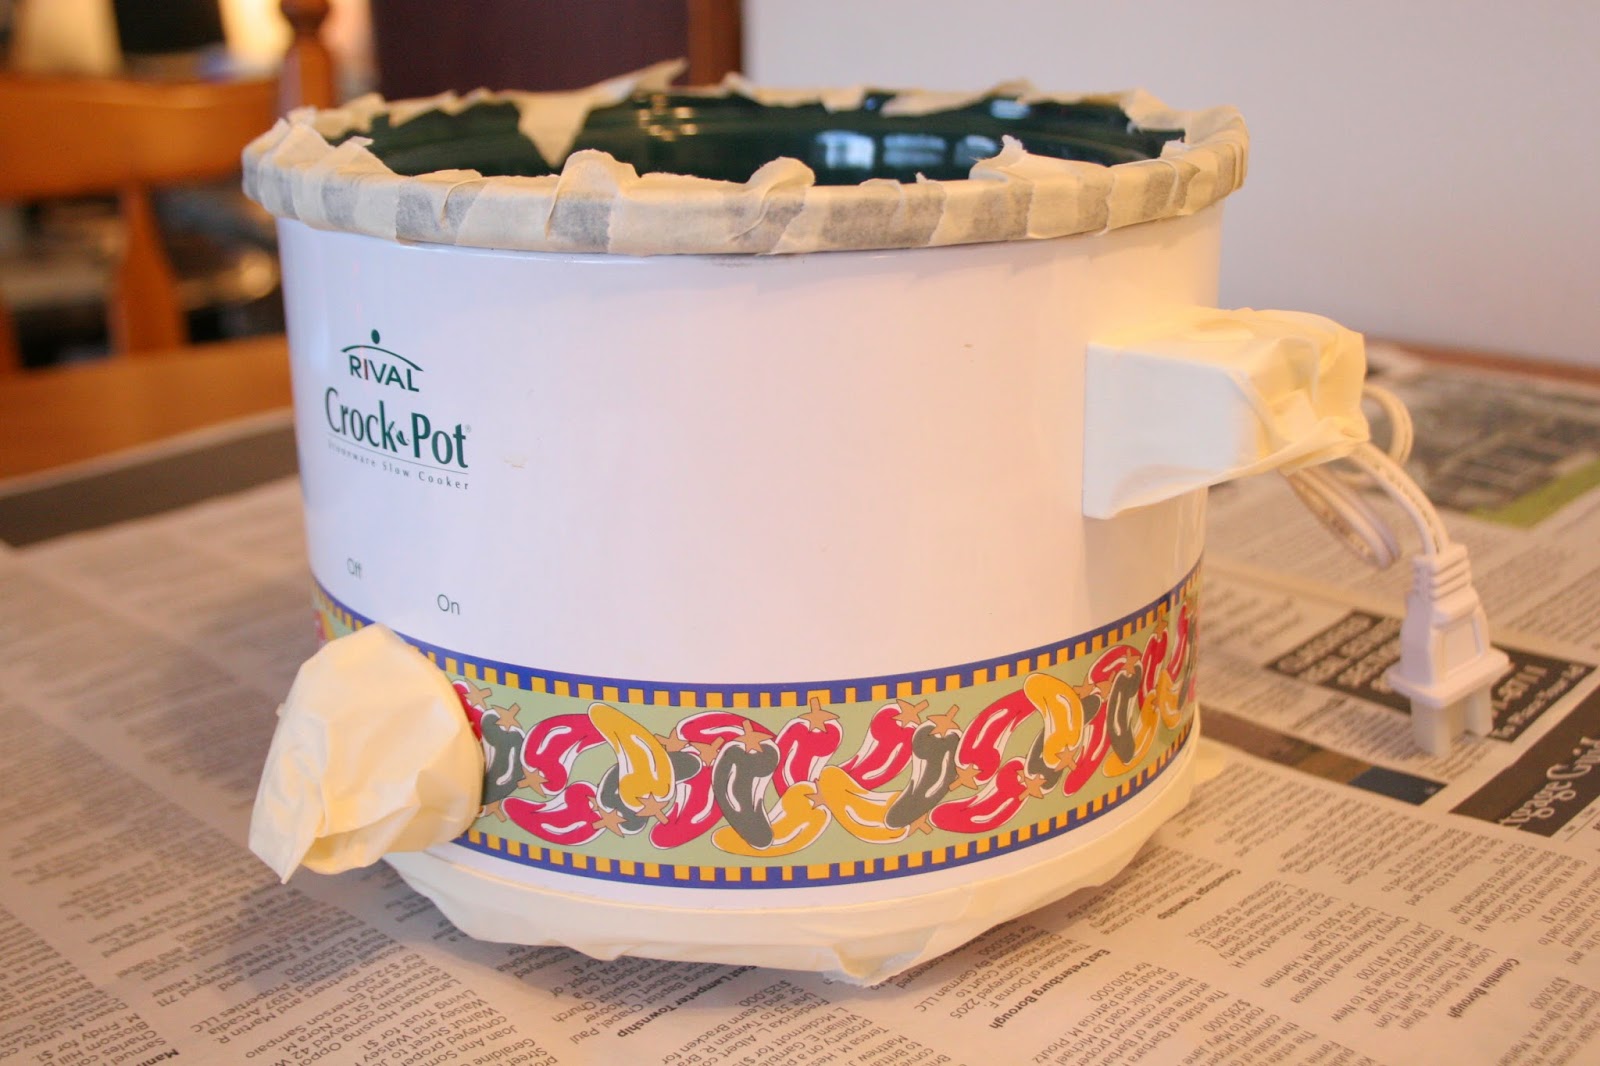 Easy crockpot makeover without using paint - Cuckoo4Design